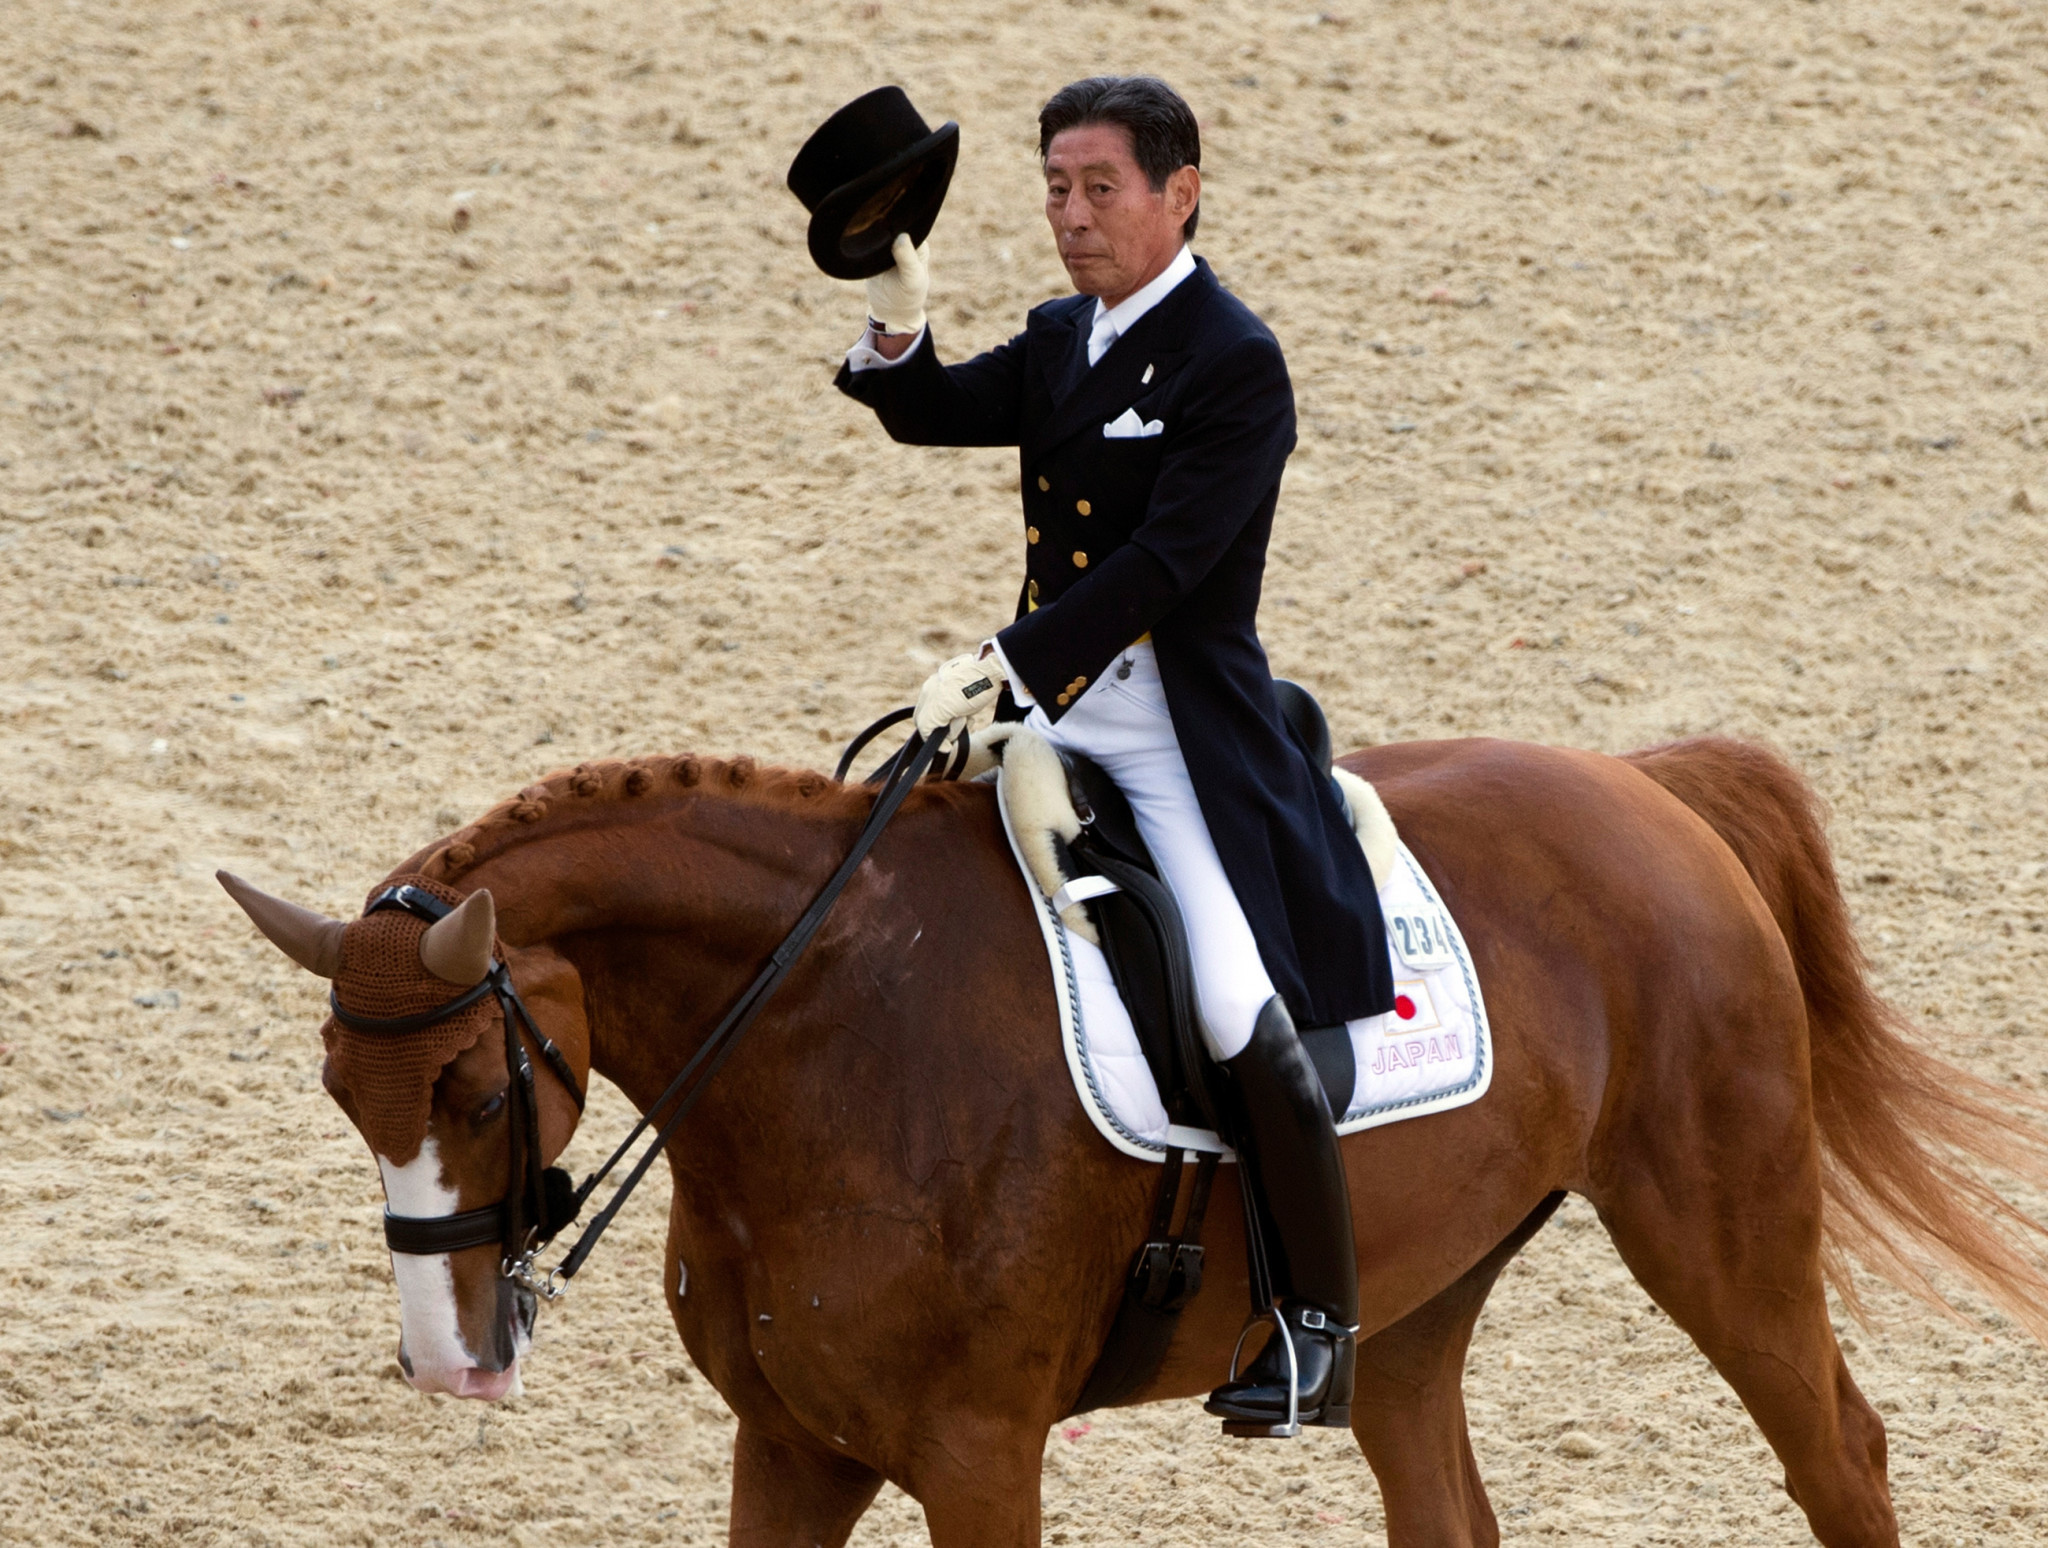 Hiroshi Hoketsu has questioned comments regarding hosting the Games with COVID-19 ©Getty Images